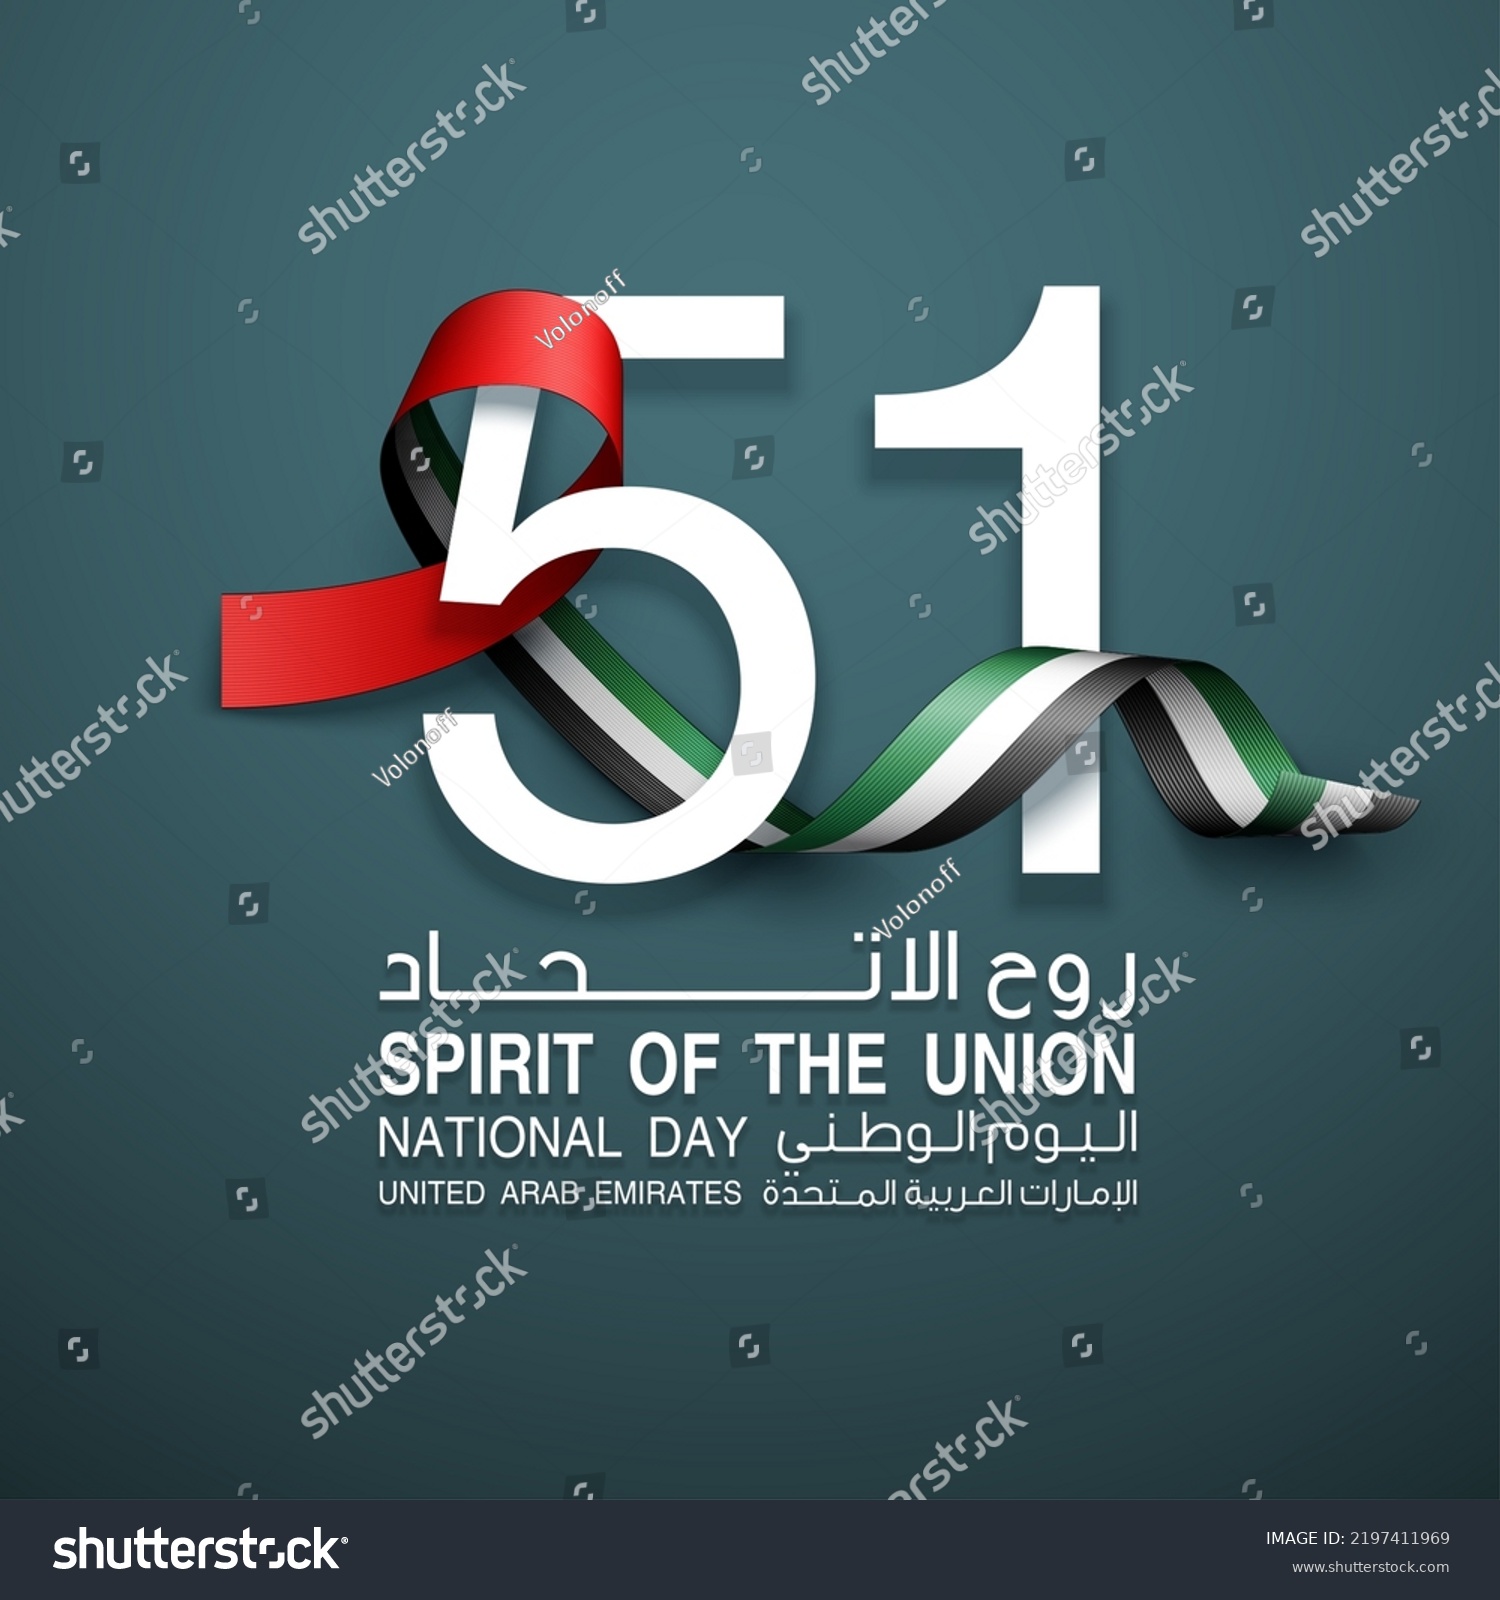 logo UAE national day. translated Arabic: Spirit of the union United Arab Emirates National day. Banner with UAE state flag. Illustration 51 years. Card Emirates honor 51th anniversary 2 December 2022 #2197411969